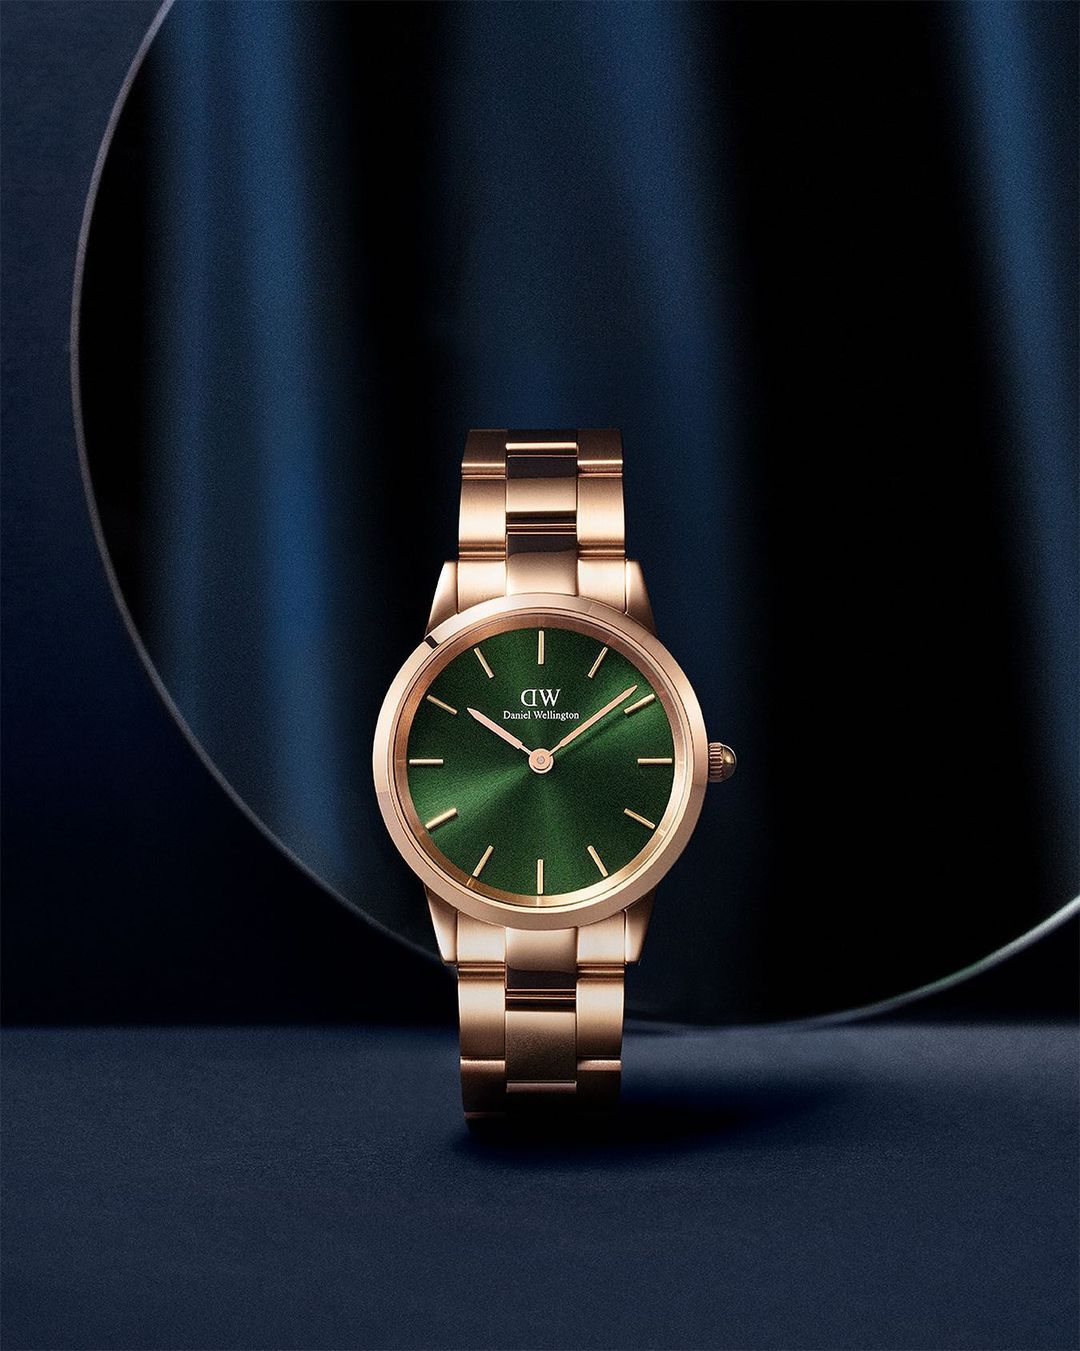 Daniel Wellington on Twitter: "You asked, we listened! The desired dial is finally back. Introducing the Iconic Link Emerald, a timepiece that attracts attention in all the right ways. Now available